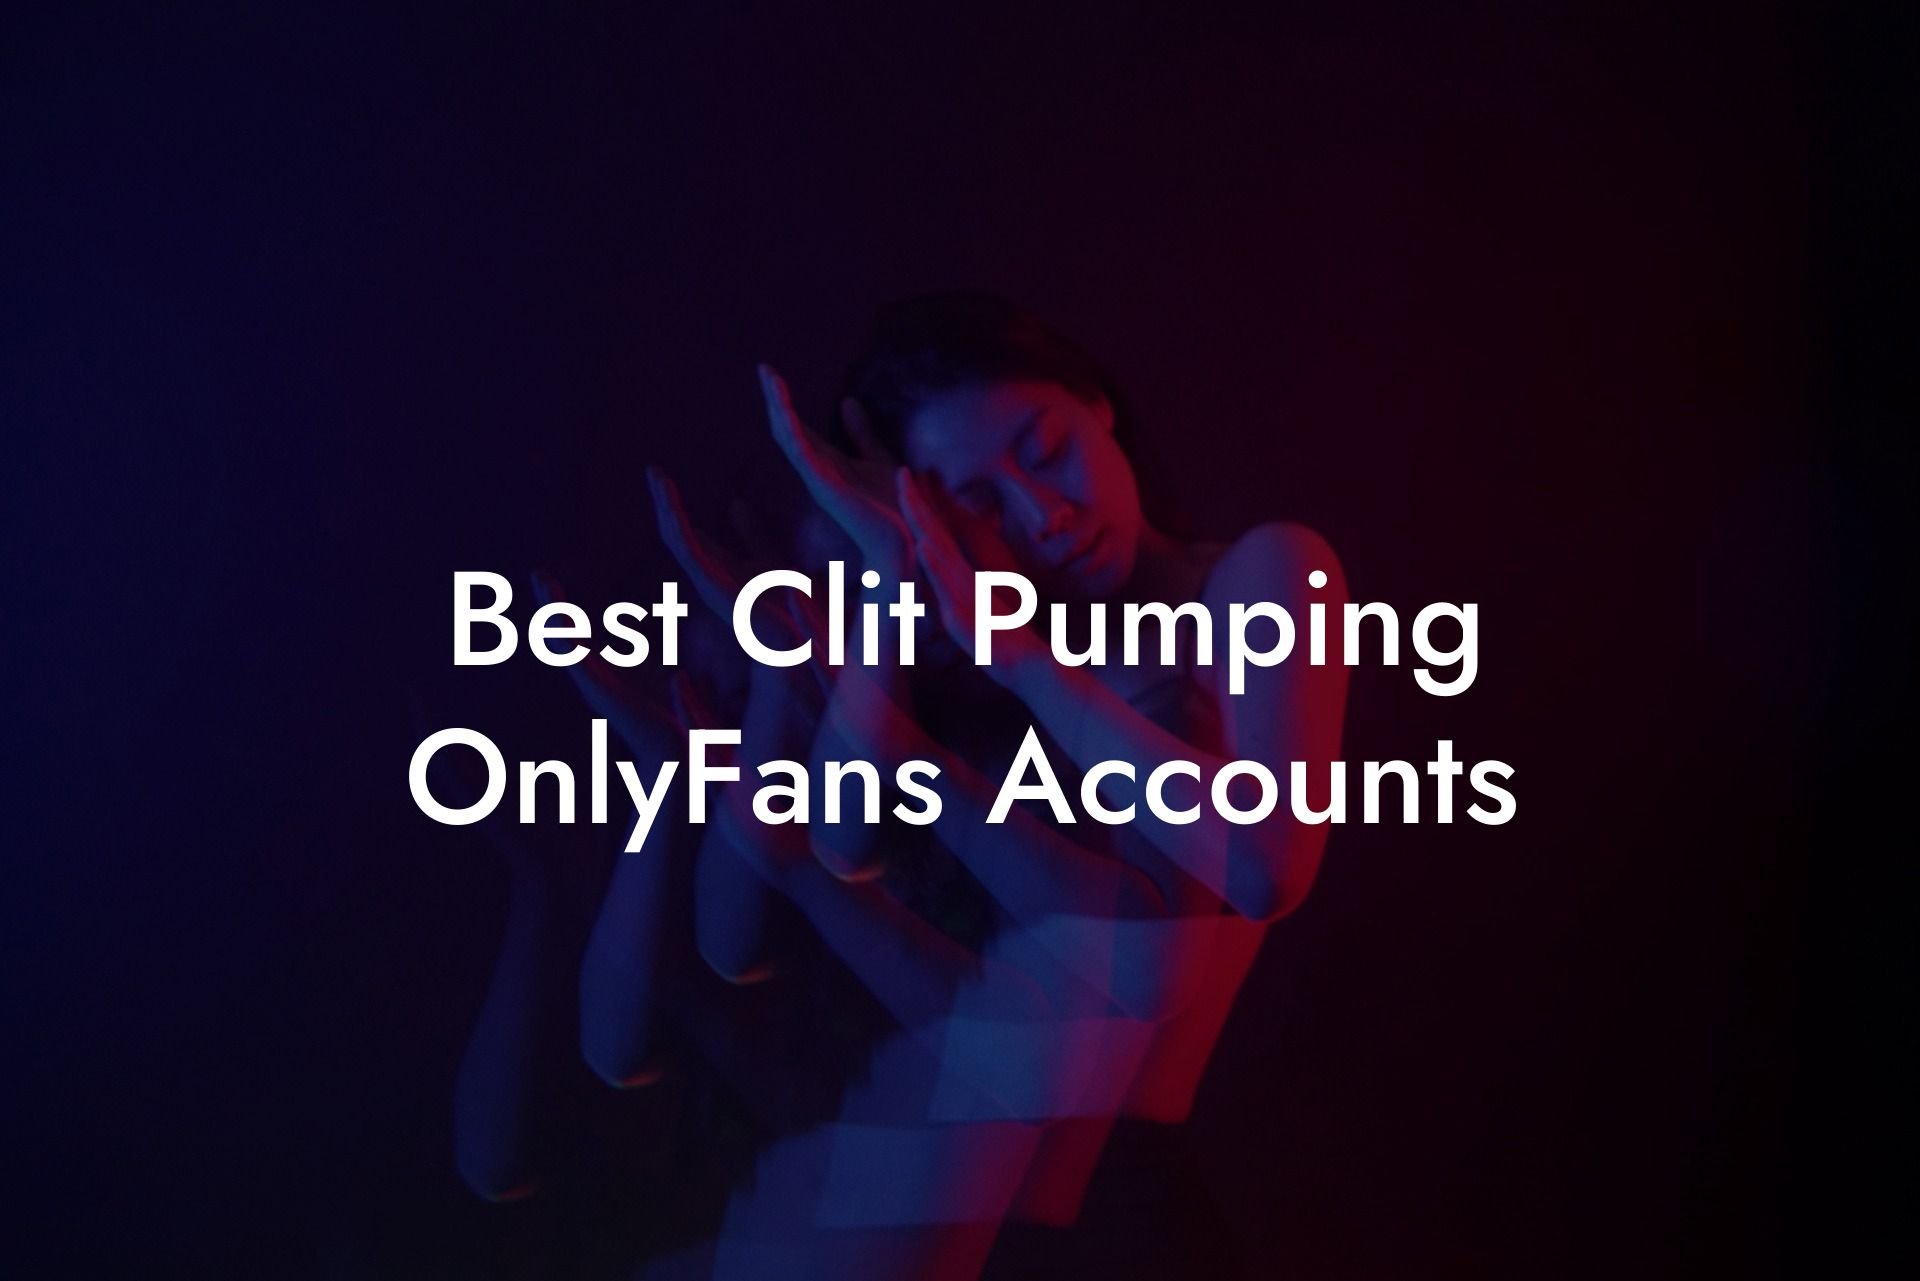 Best Clit Pumping OnlyFans Accounts